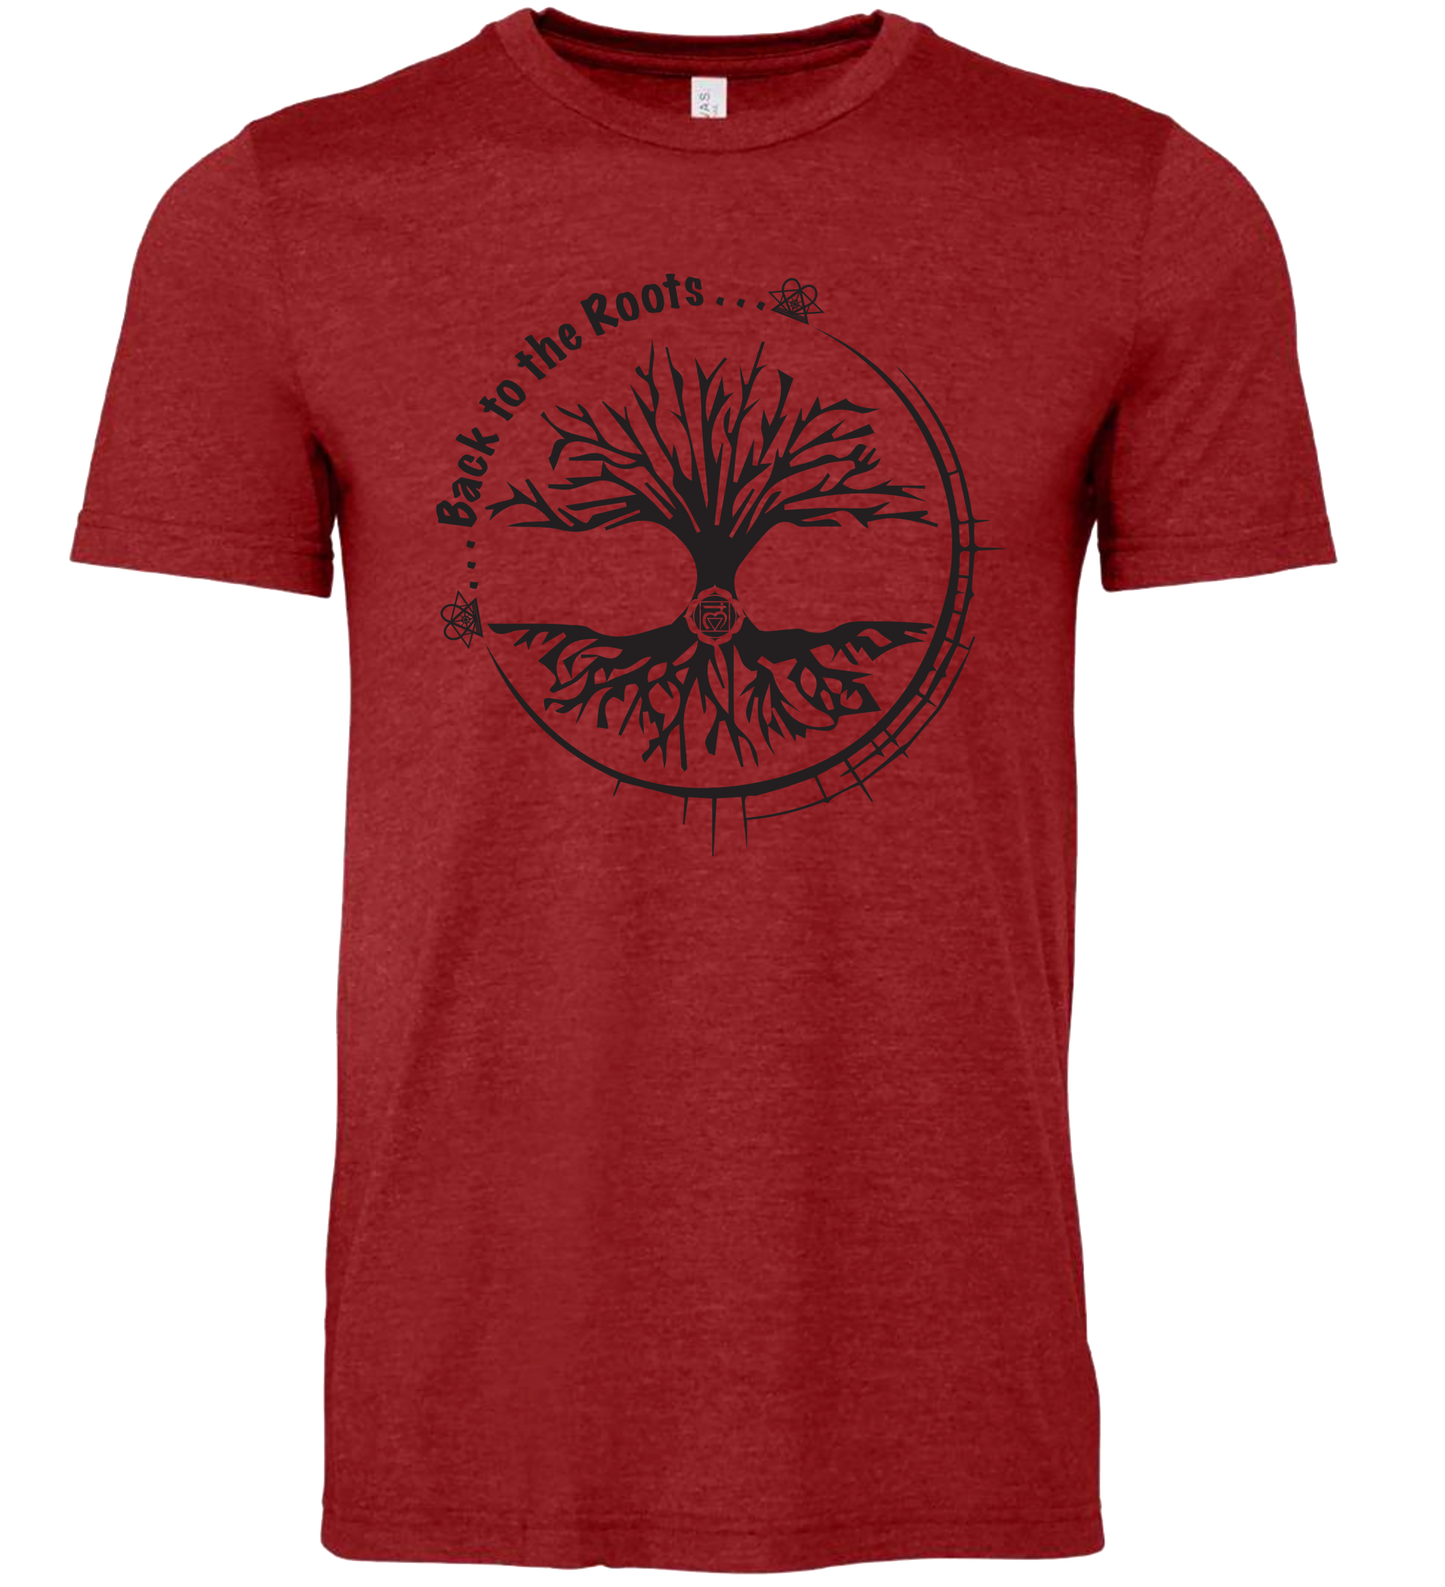 Back to the Roots, Chakra T-shirt